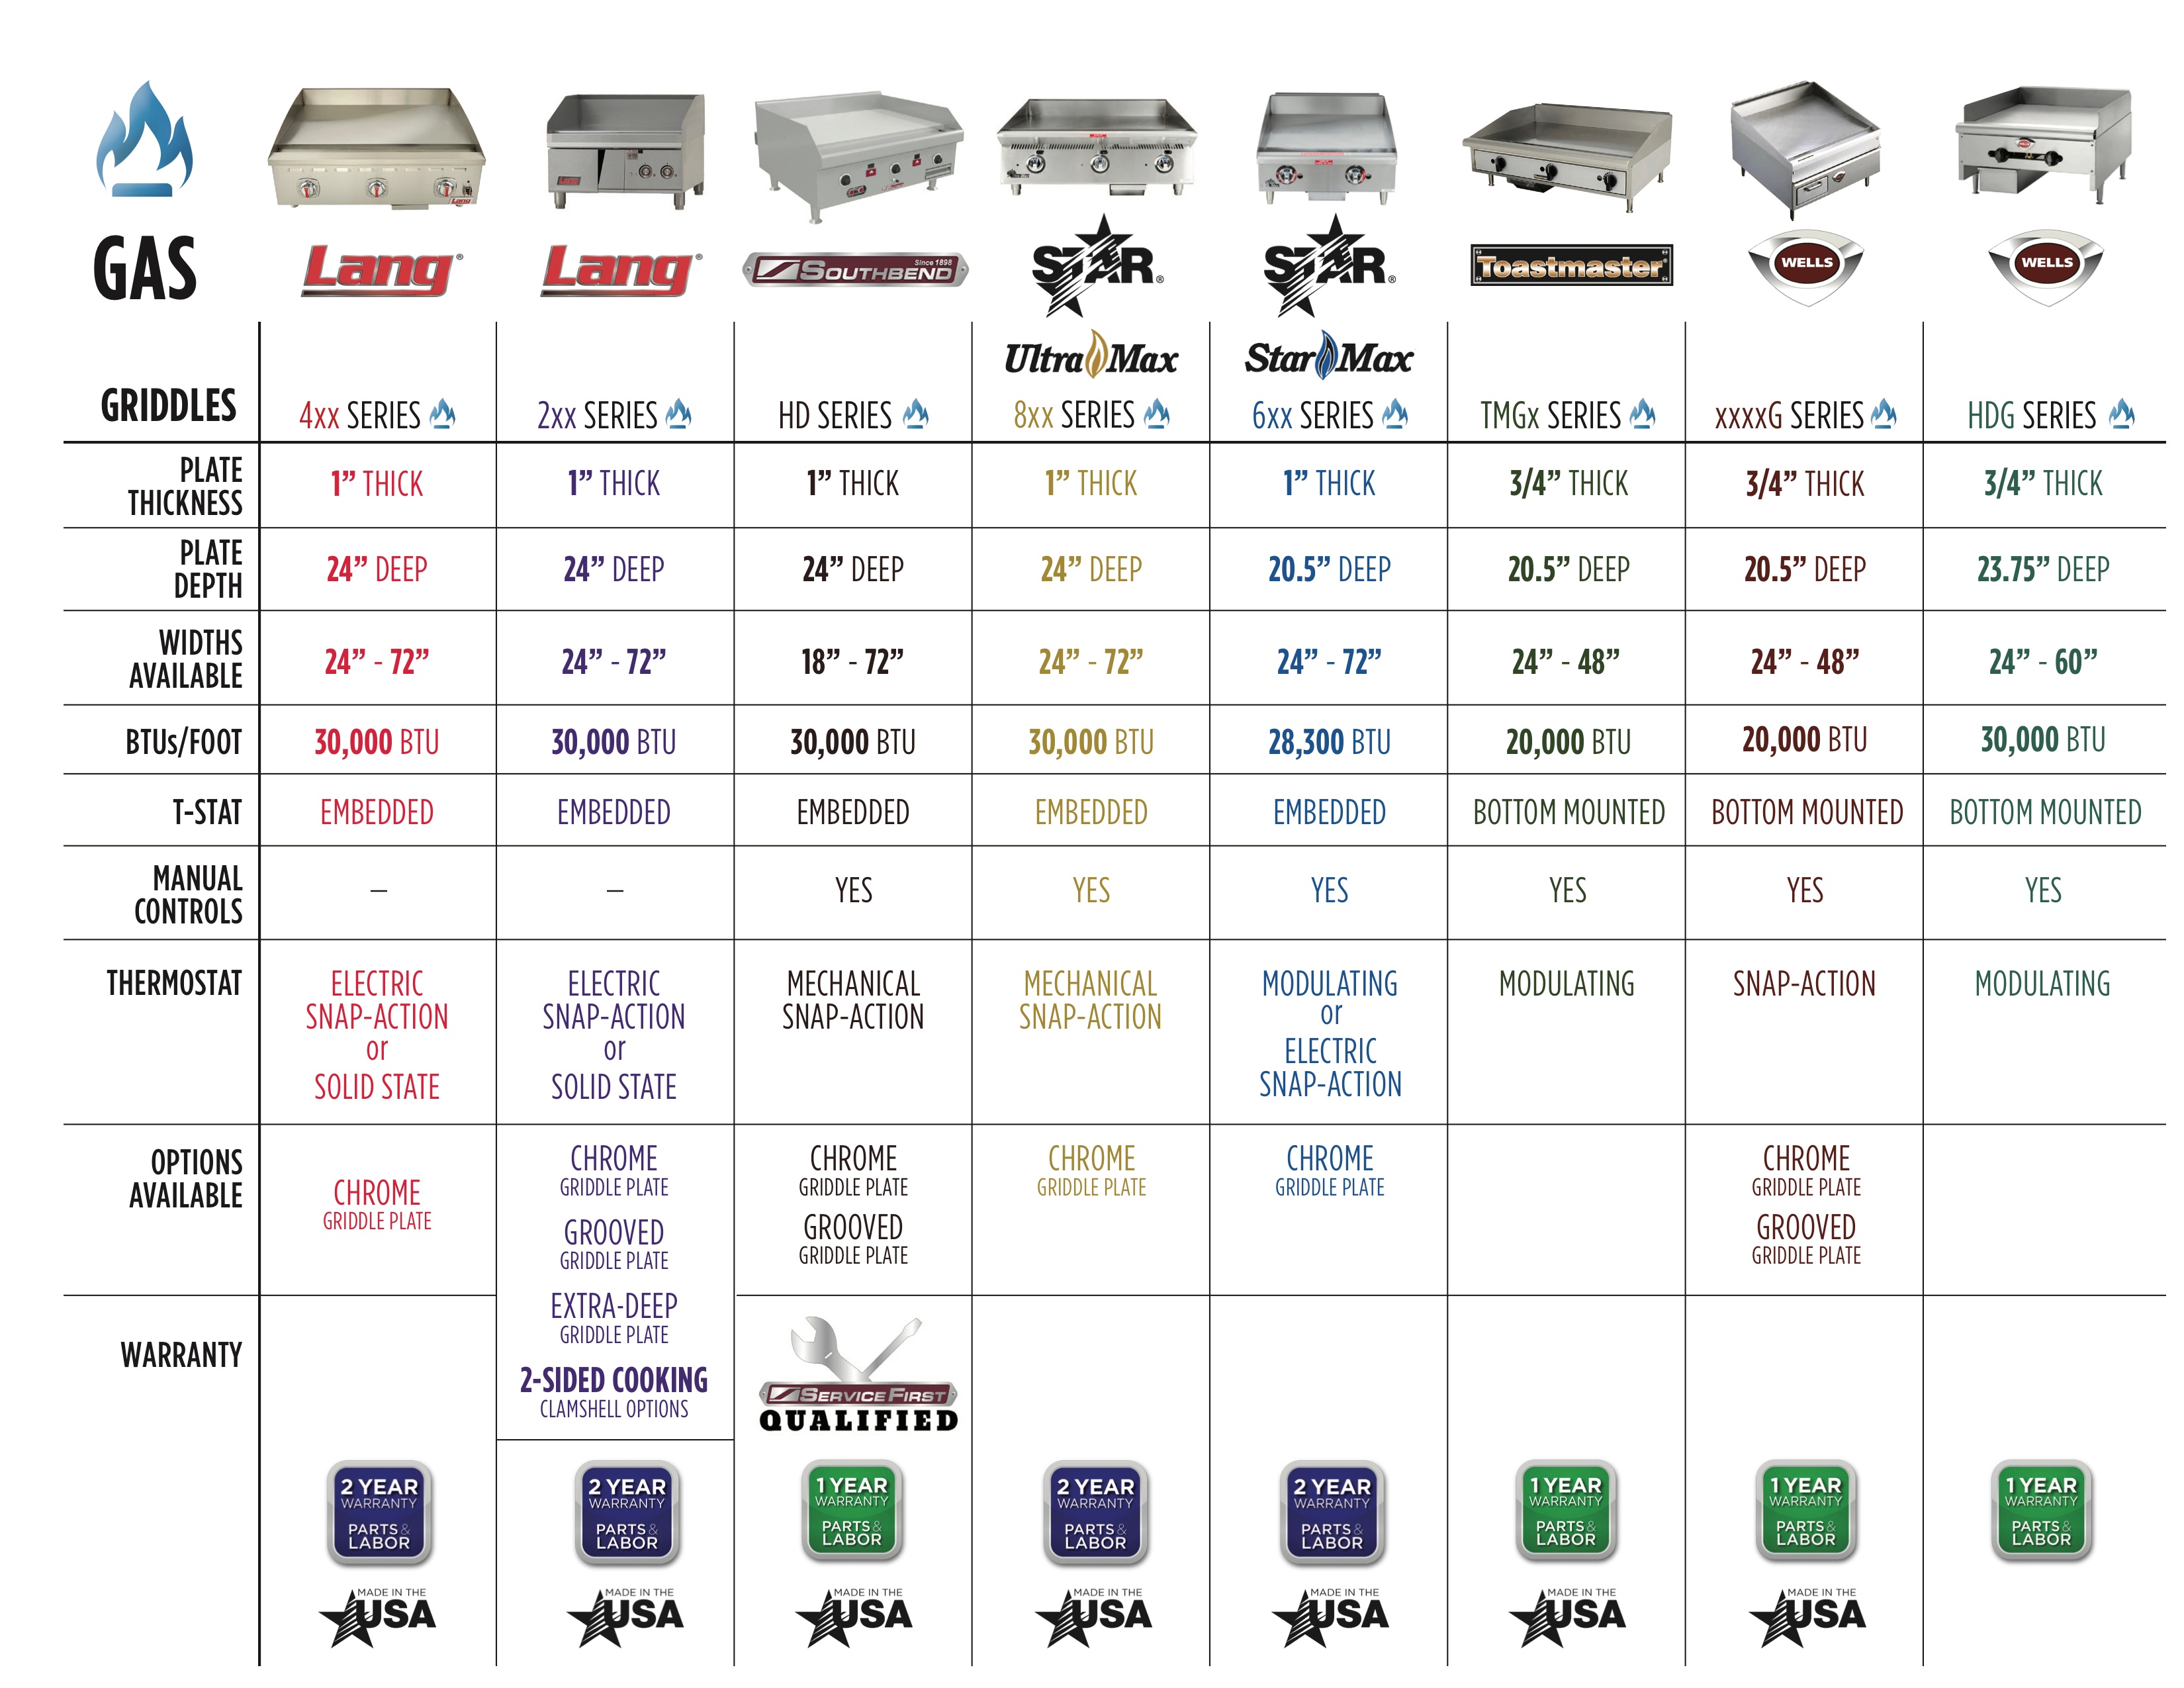 Countertop Griddle Comparison Charts from High Sabatino